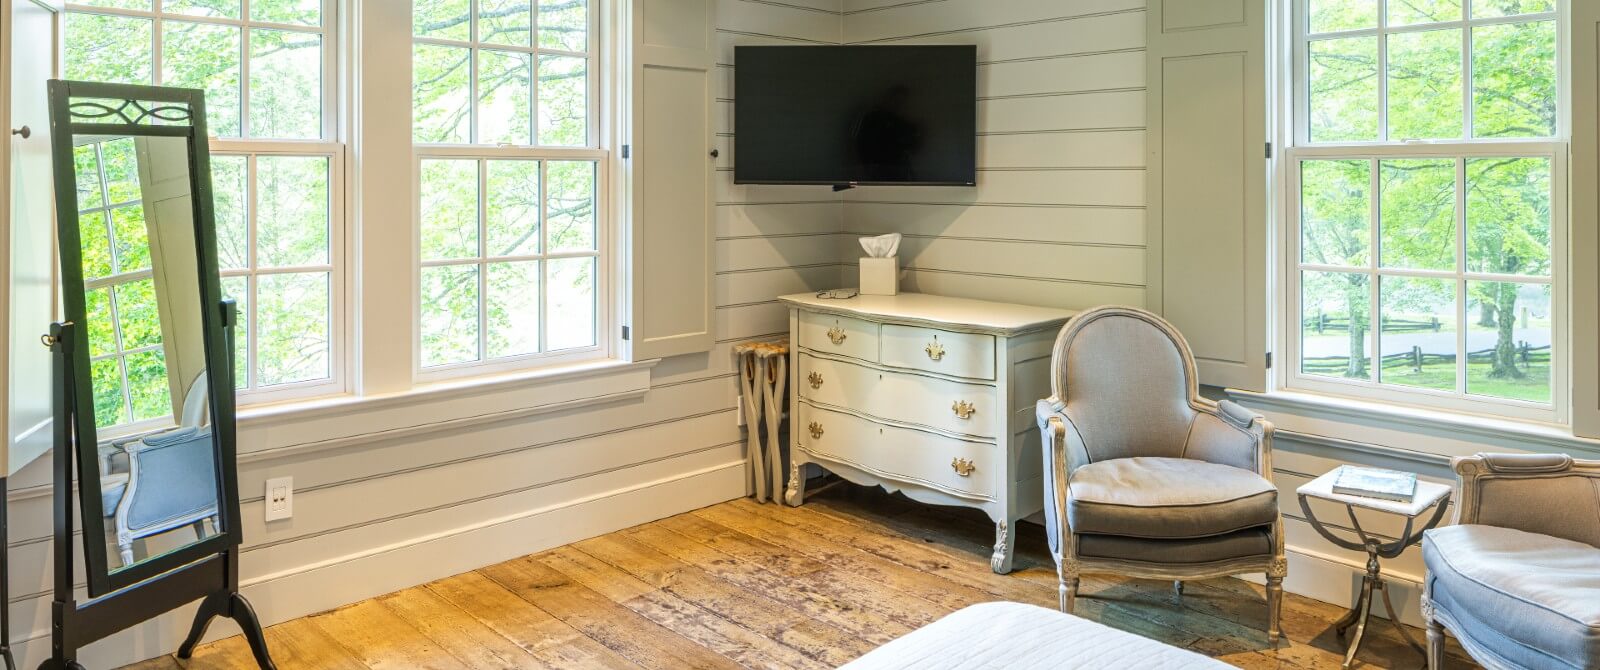 Bedroom with shiplap walls, standing mirror, two chairs and TV in corner over a dresser